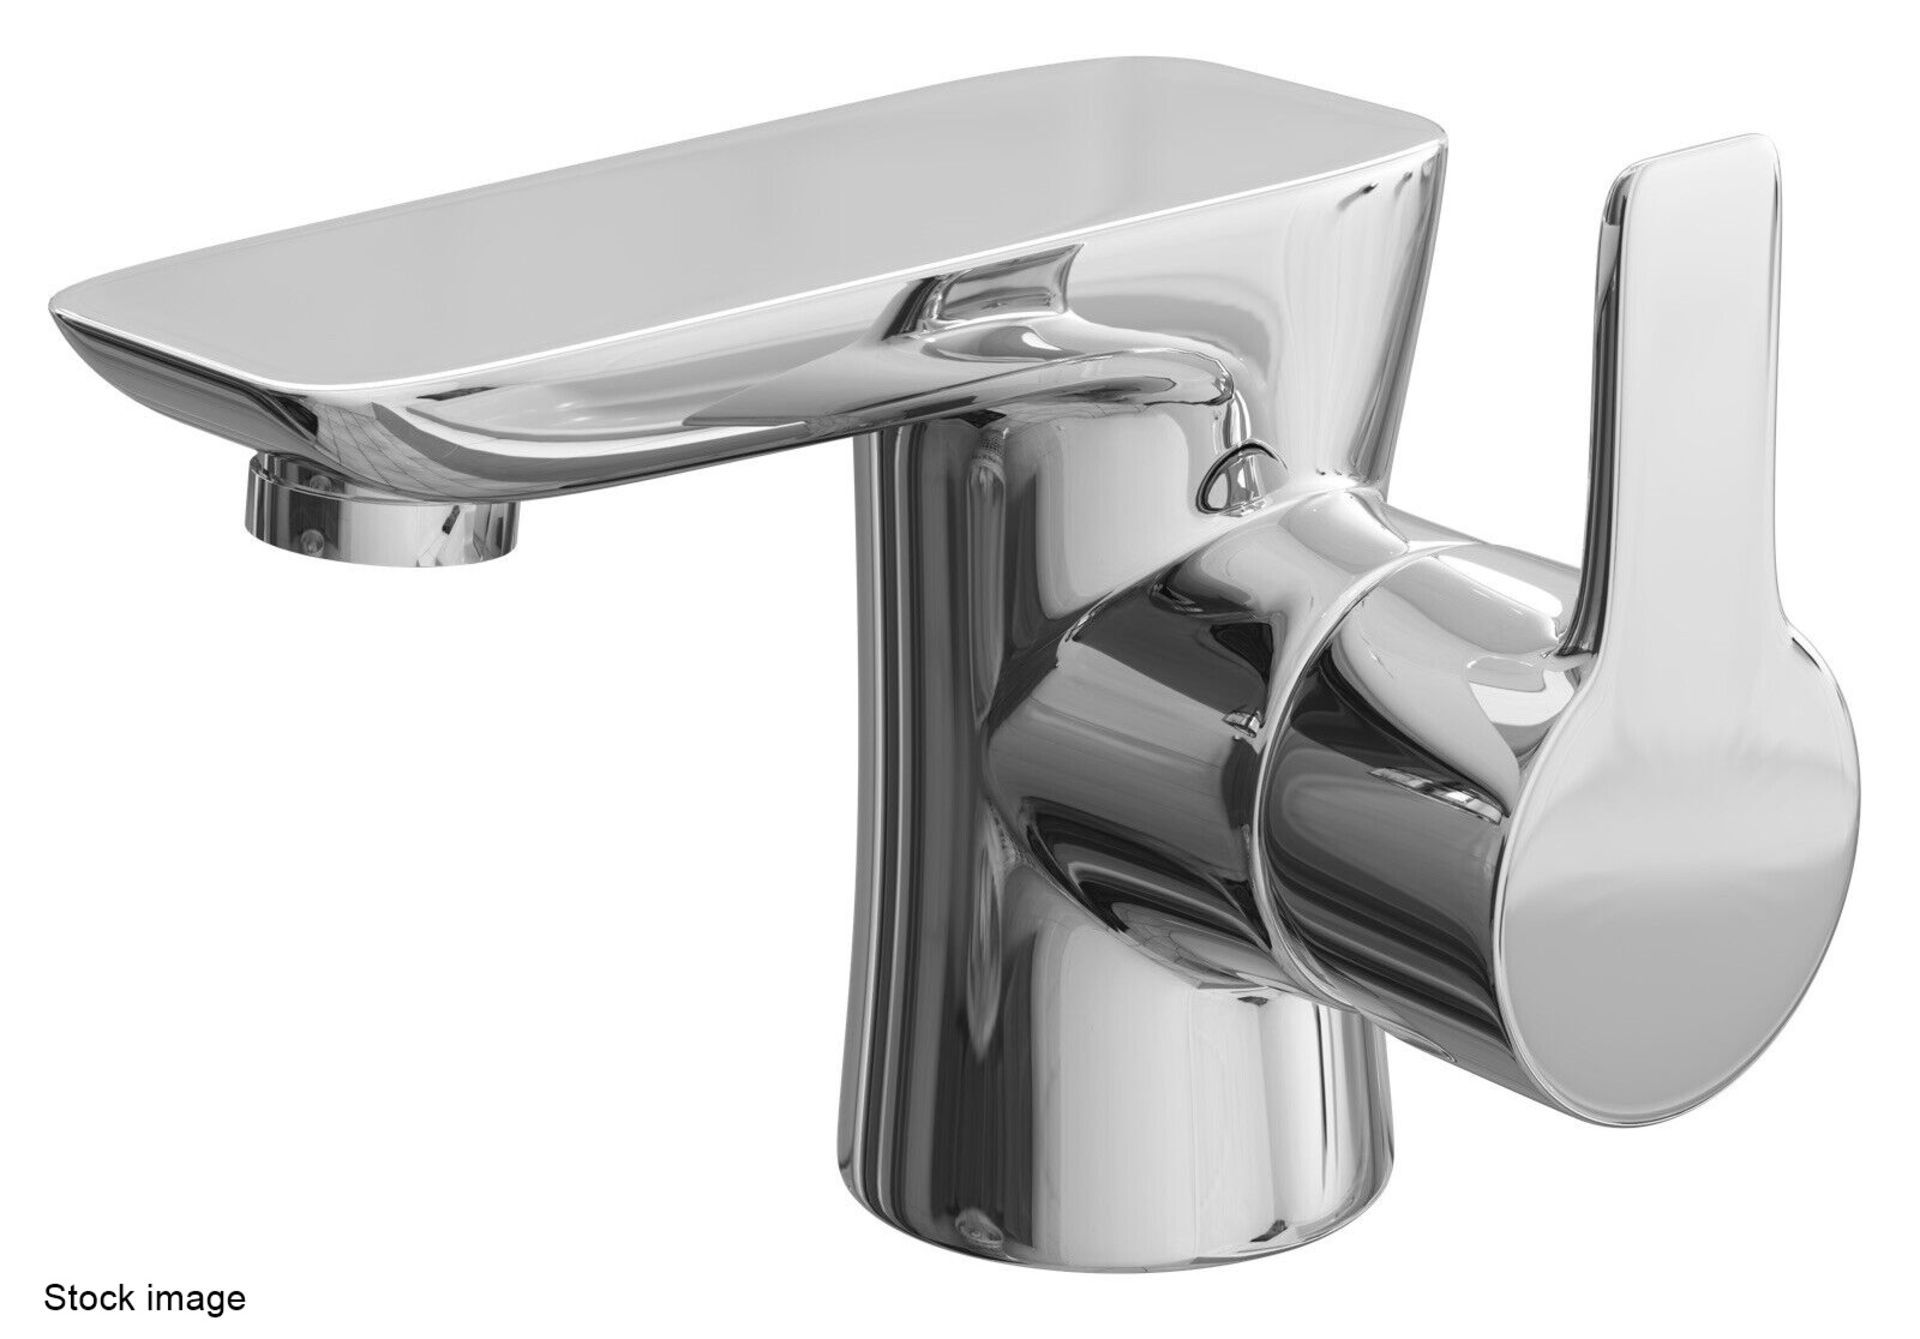 1 x CASSELLIE 'Pedras' Mono Basin Mixer With Push Waste In Chrome - Ref: PED001 - RRP £153.99 - - Image 2 of 3